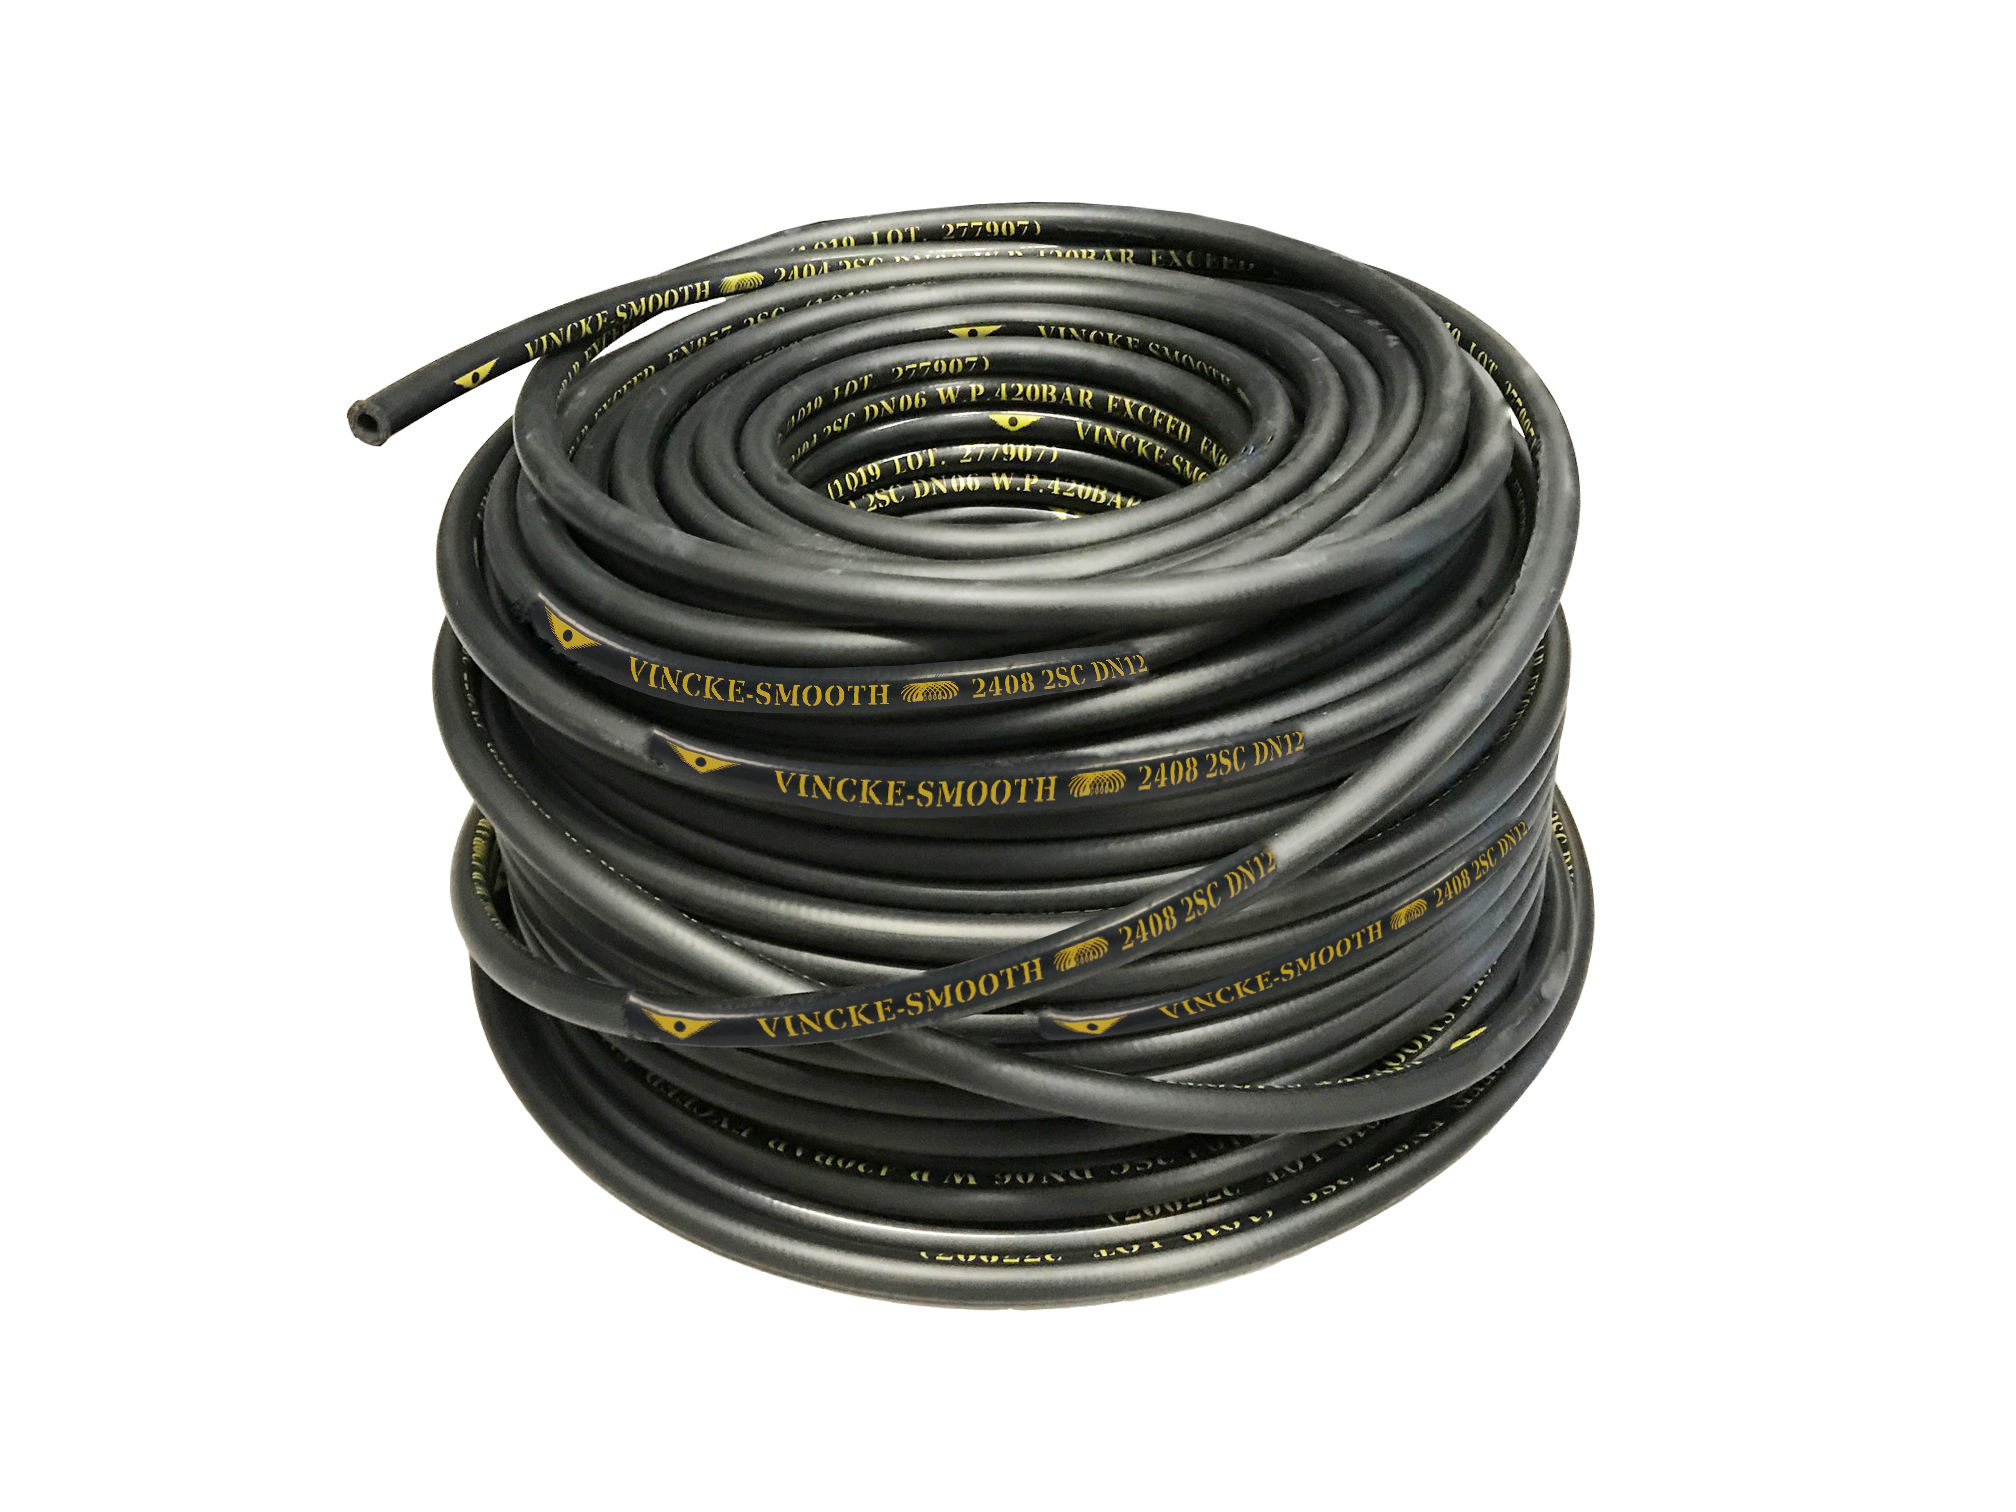 Reel of Vincke 2 Wire 100R2AT SMOOTH Hydraulic Hose, 1/4" Bore, 10 Metre Coil